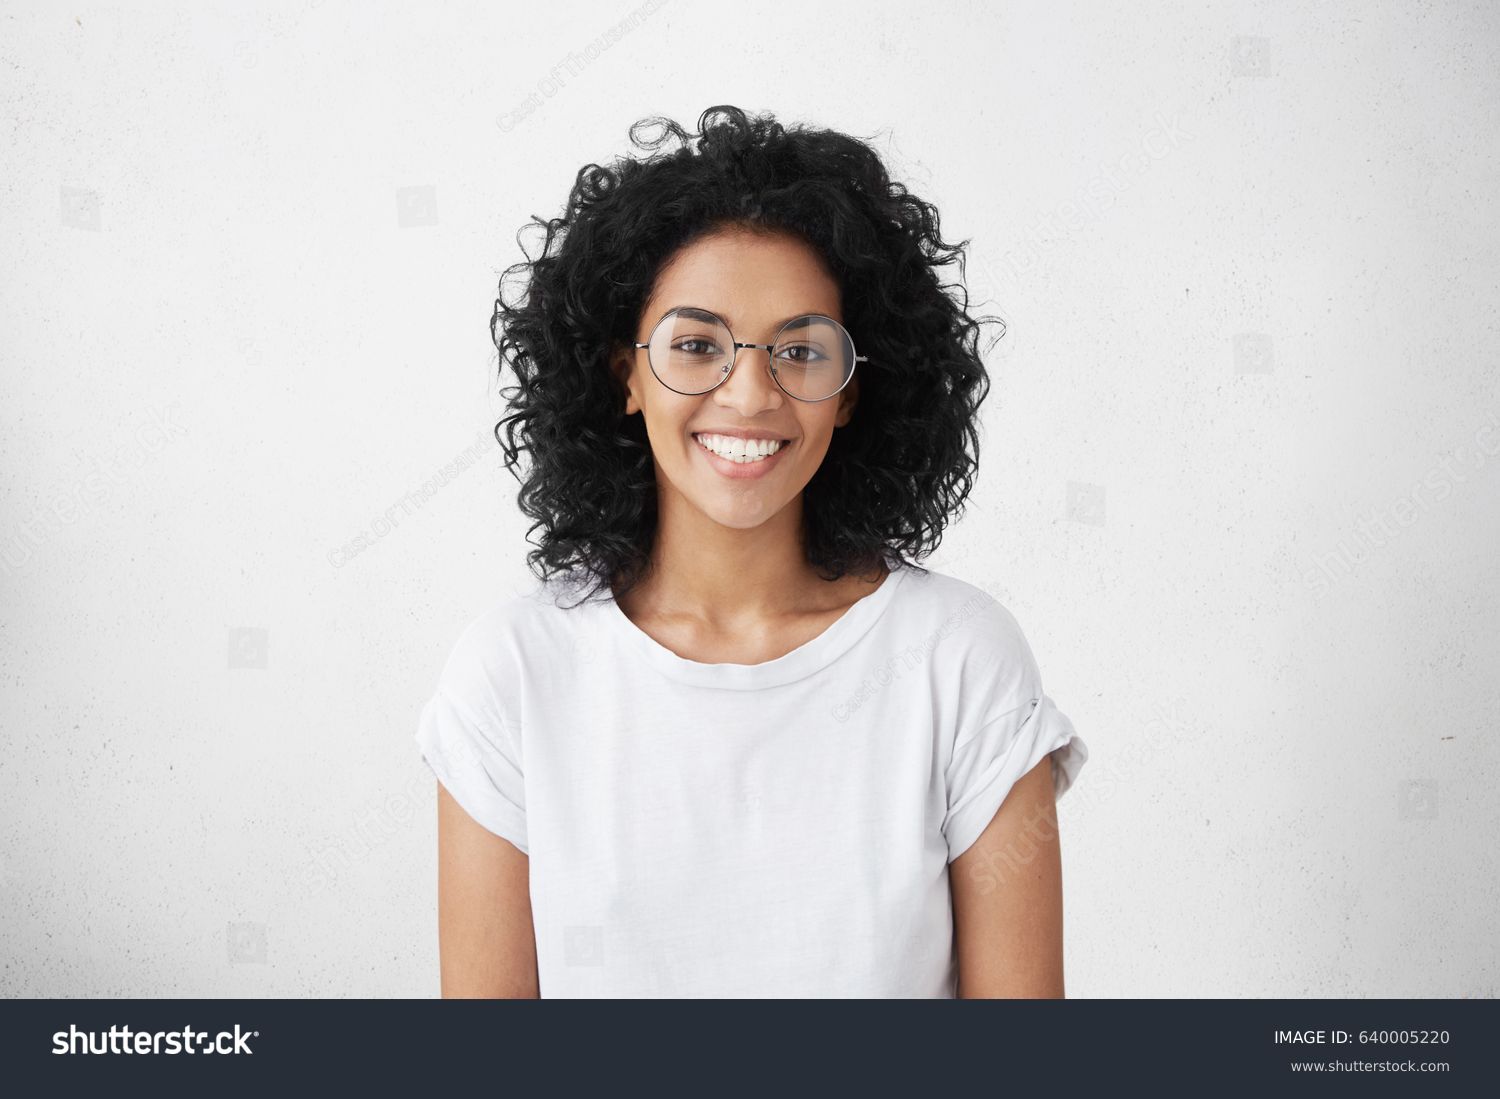 Indoor portrait of beautiful brunette young dark-skinned woman with shaggy hairstyle smiling cheerfully, showing her white teeth to camera while feeling happy and carefree on her first day-off